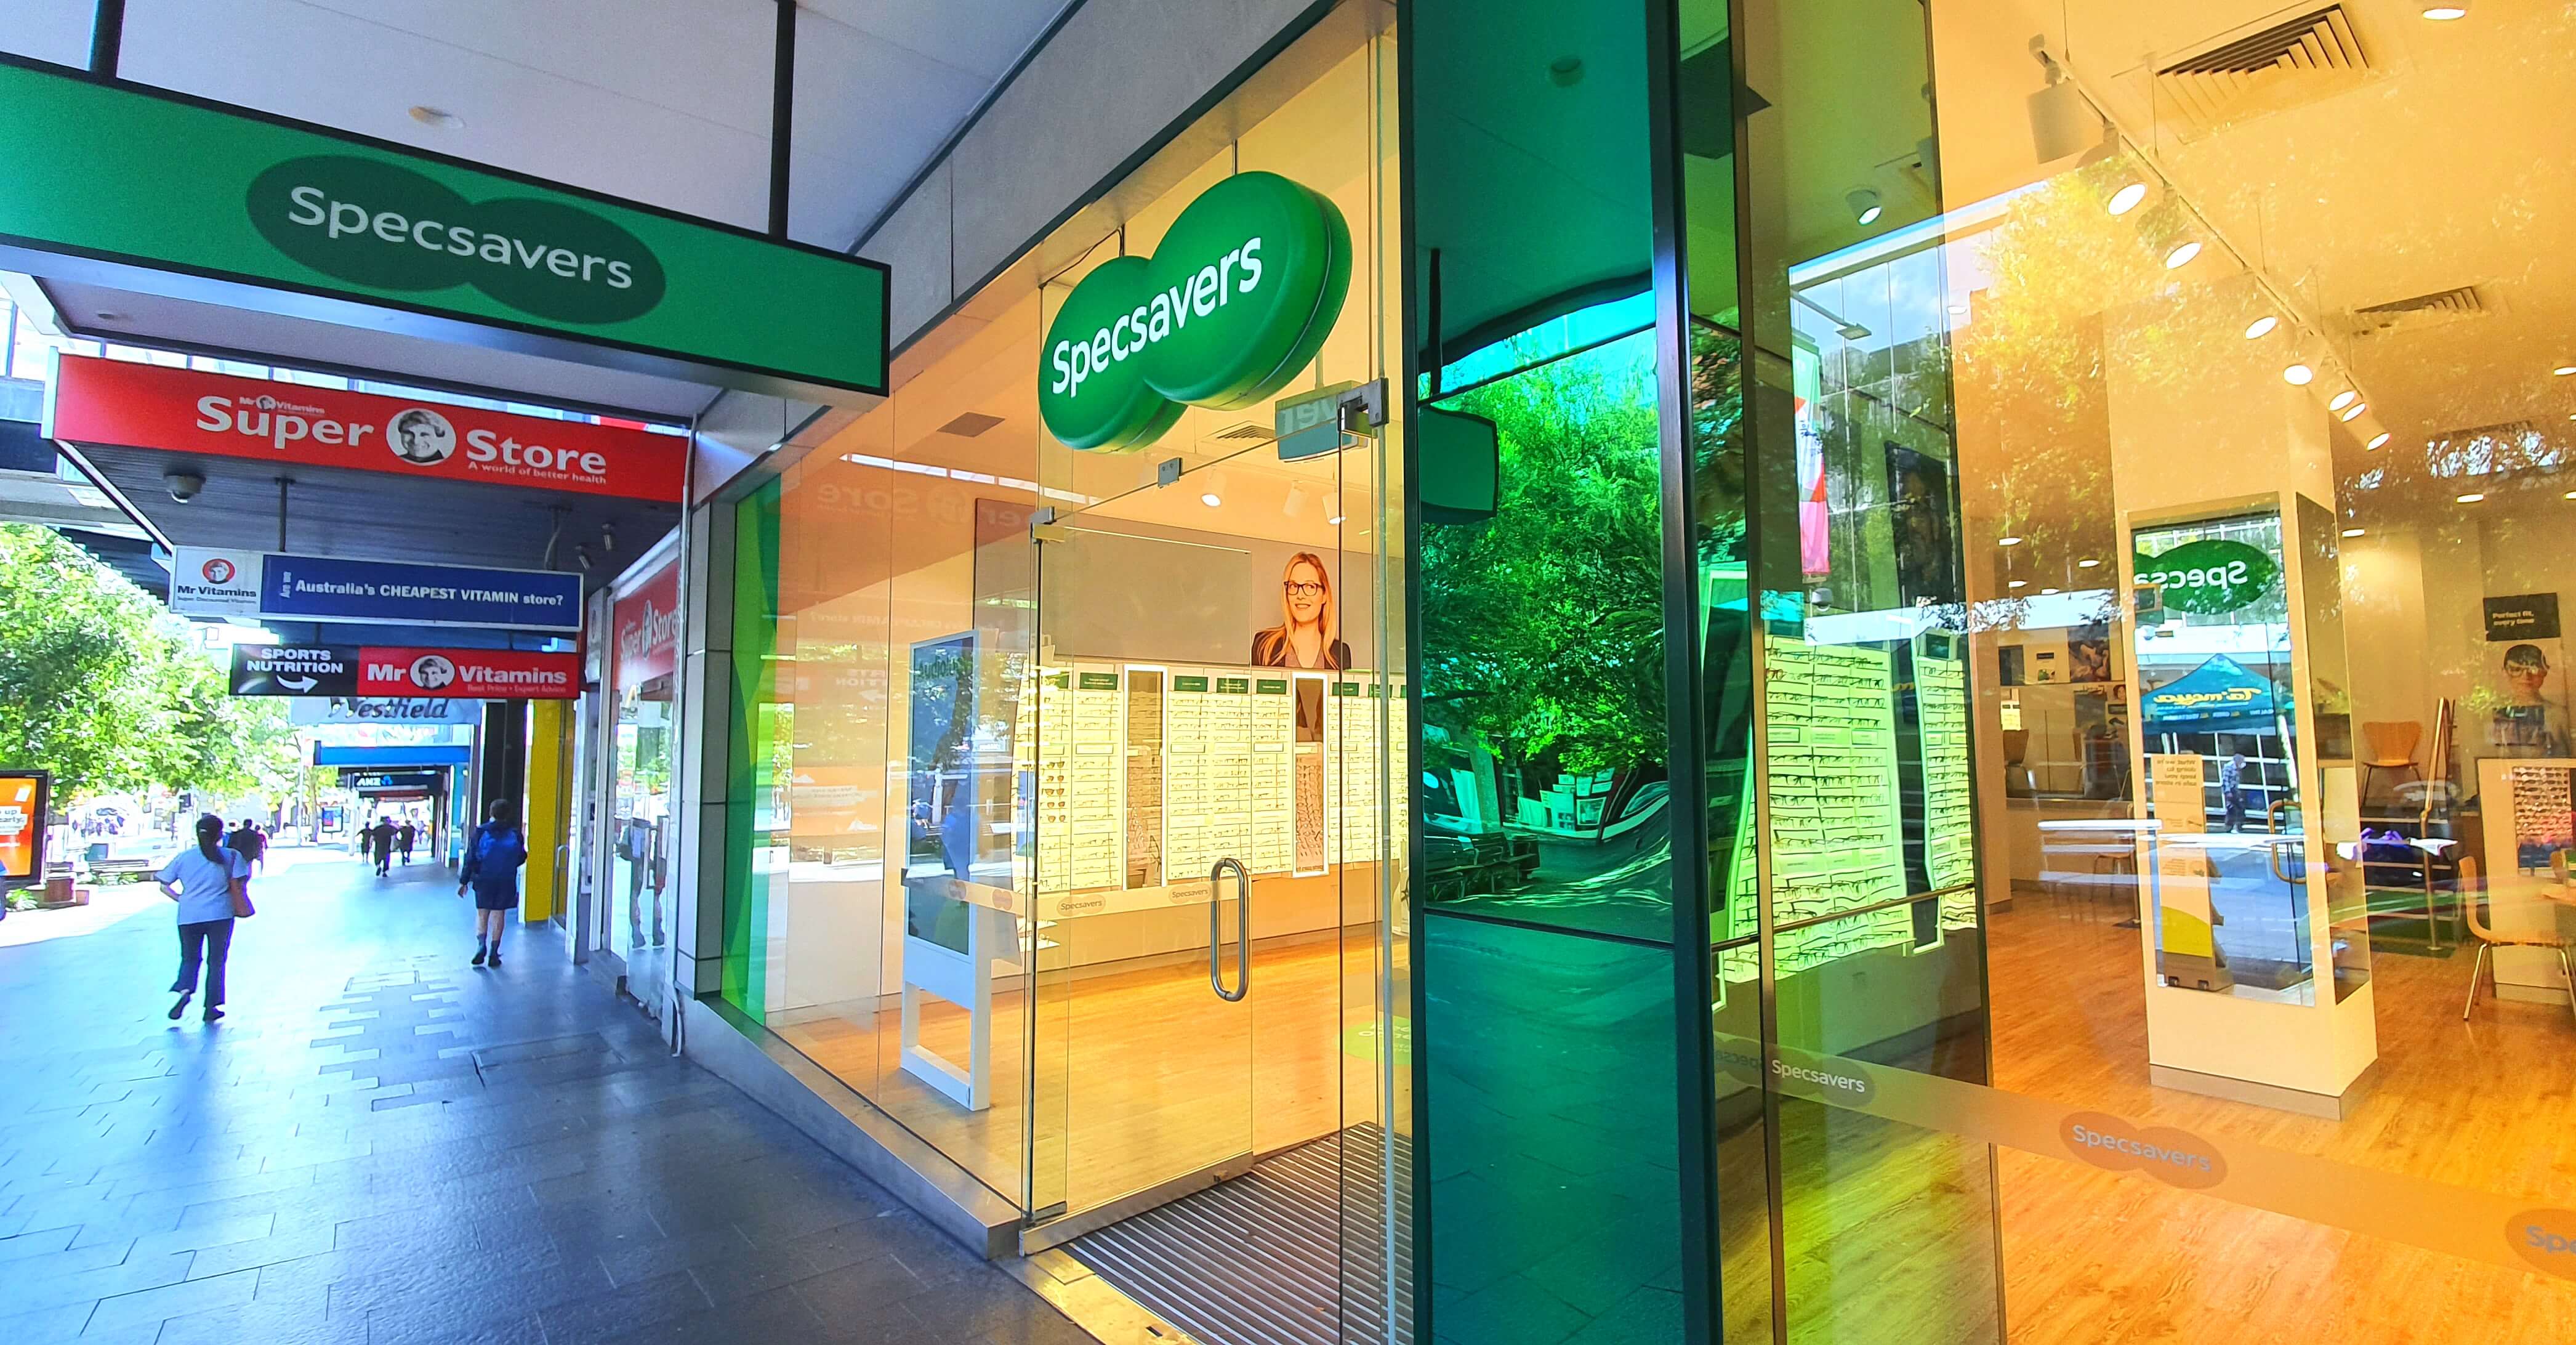 Images Specsavers Optometrists & Audiology - Chatswood